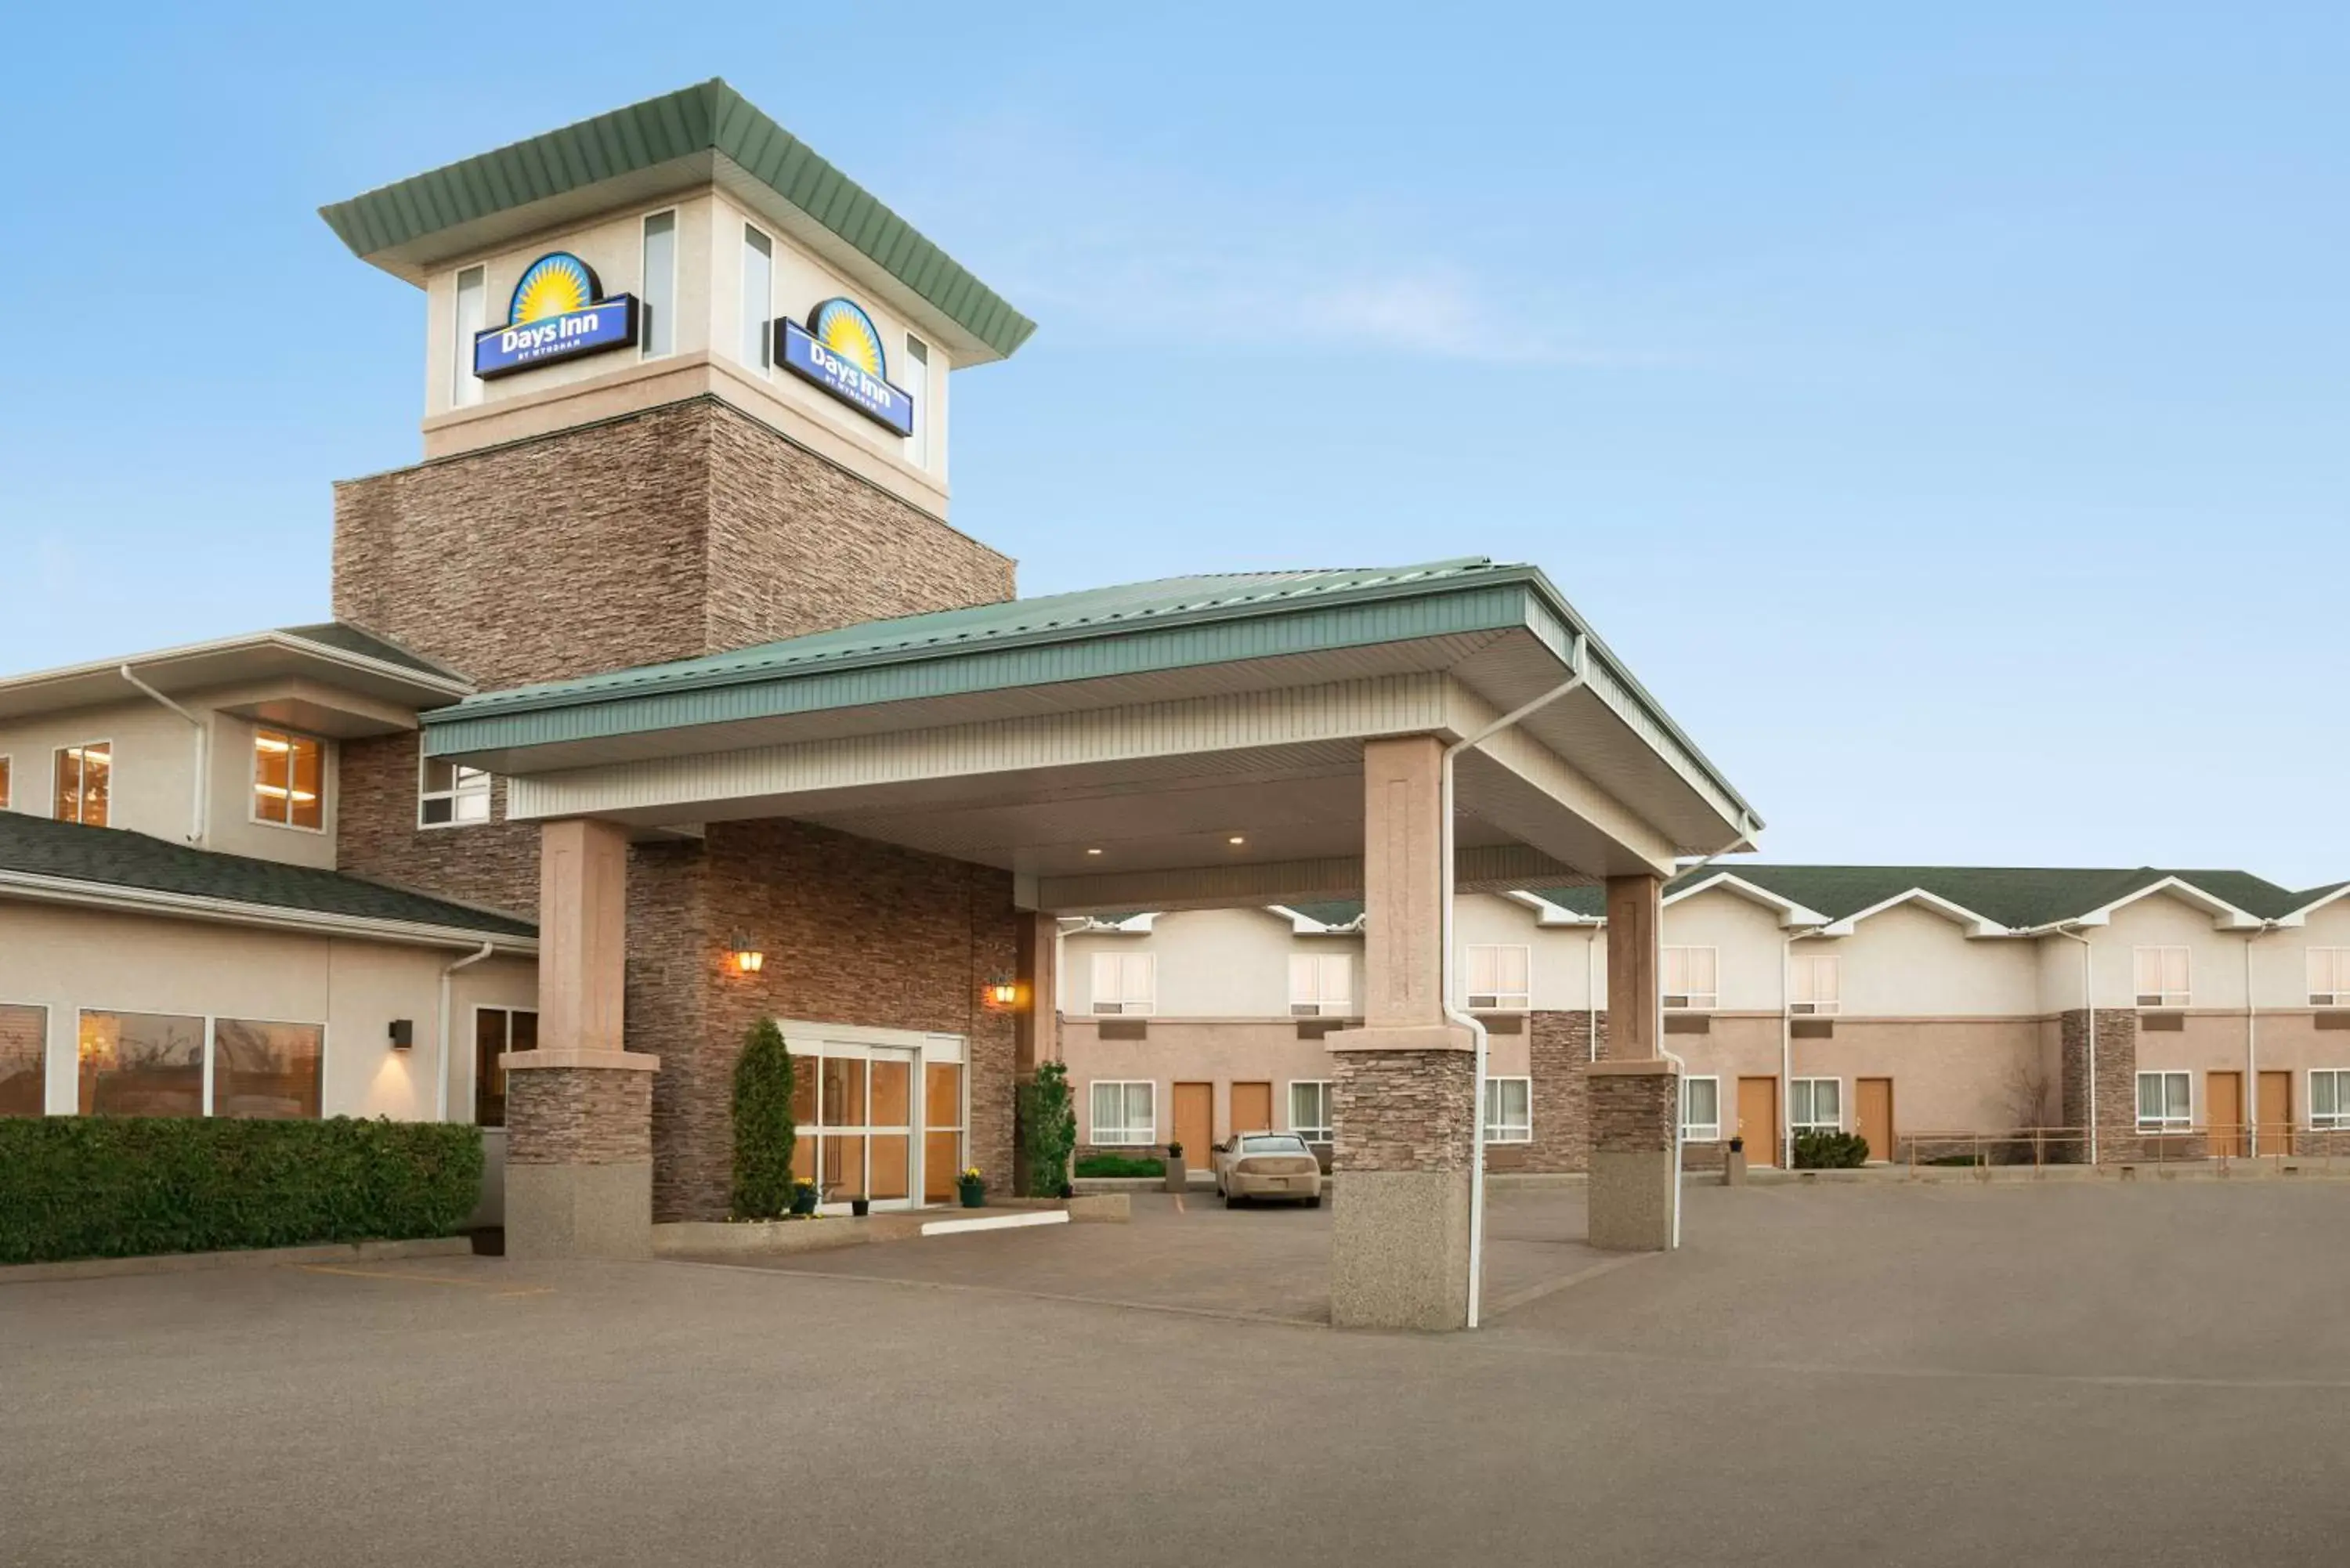 Facade/entrance, Property Building in Days Inn by Wyndham Swift Current